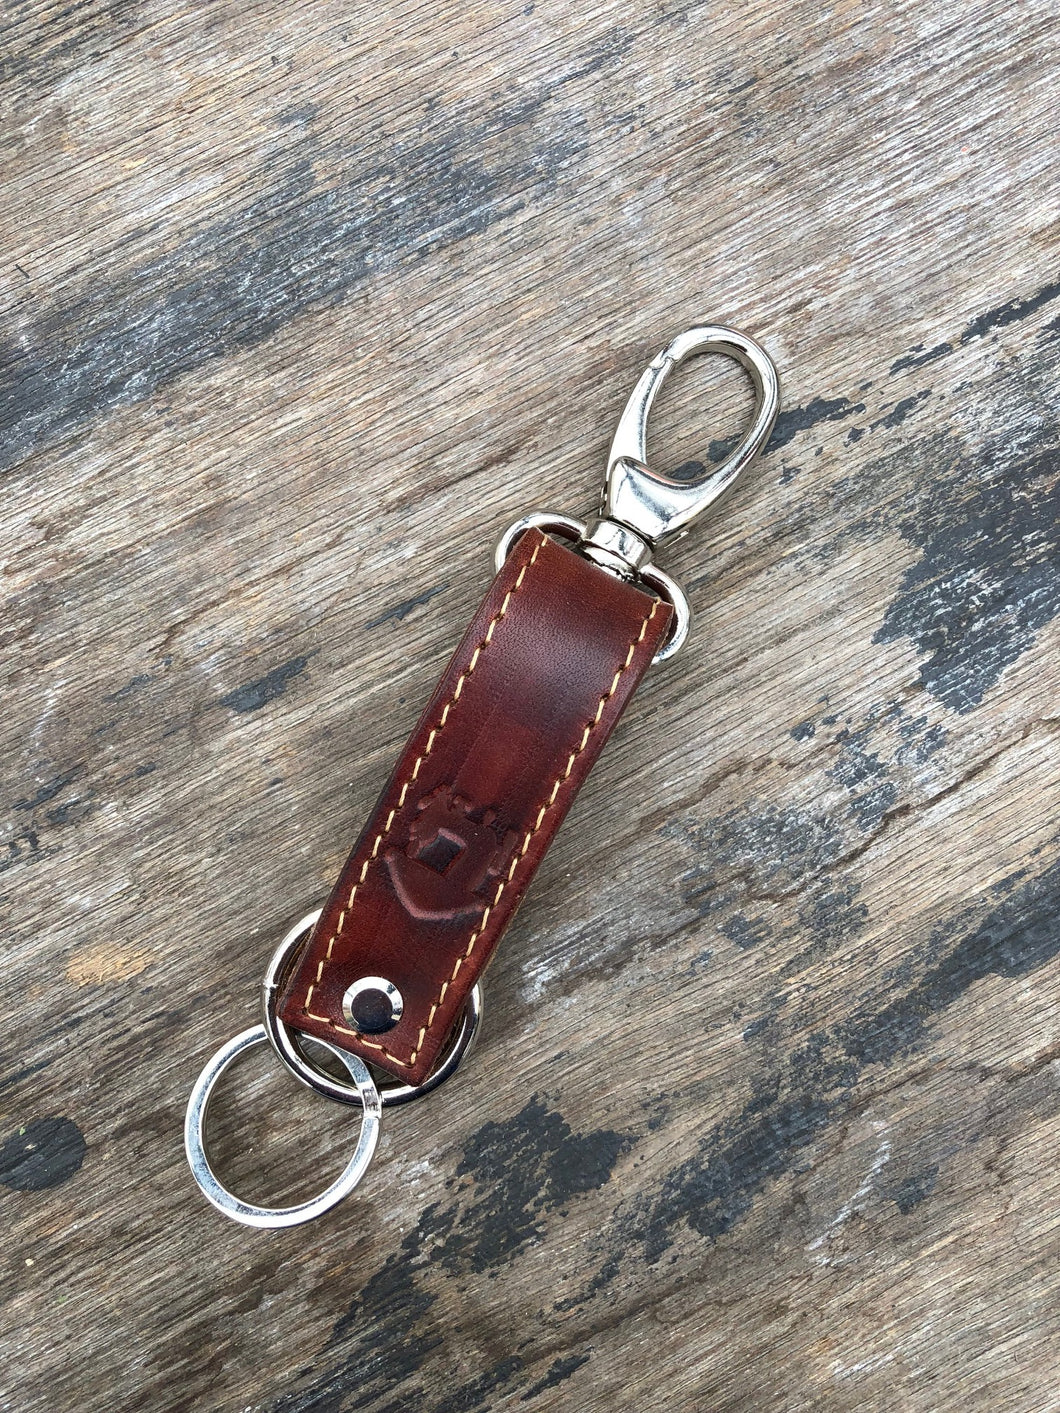 Veg tanned leather key ring